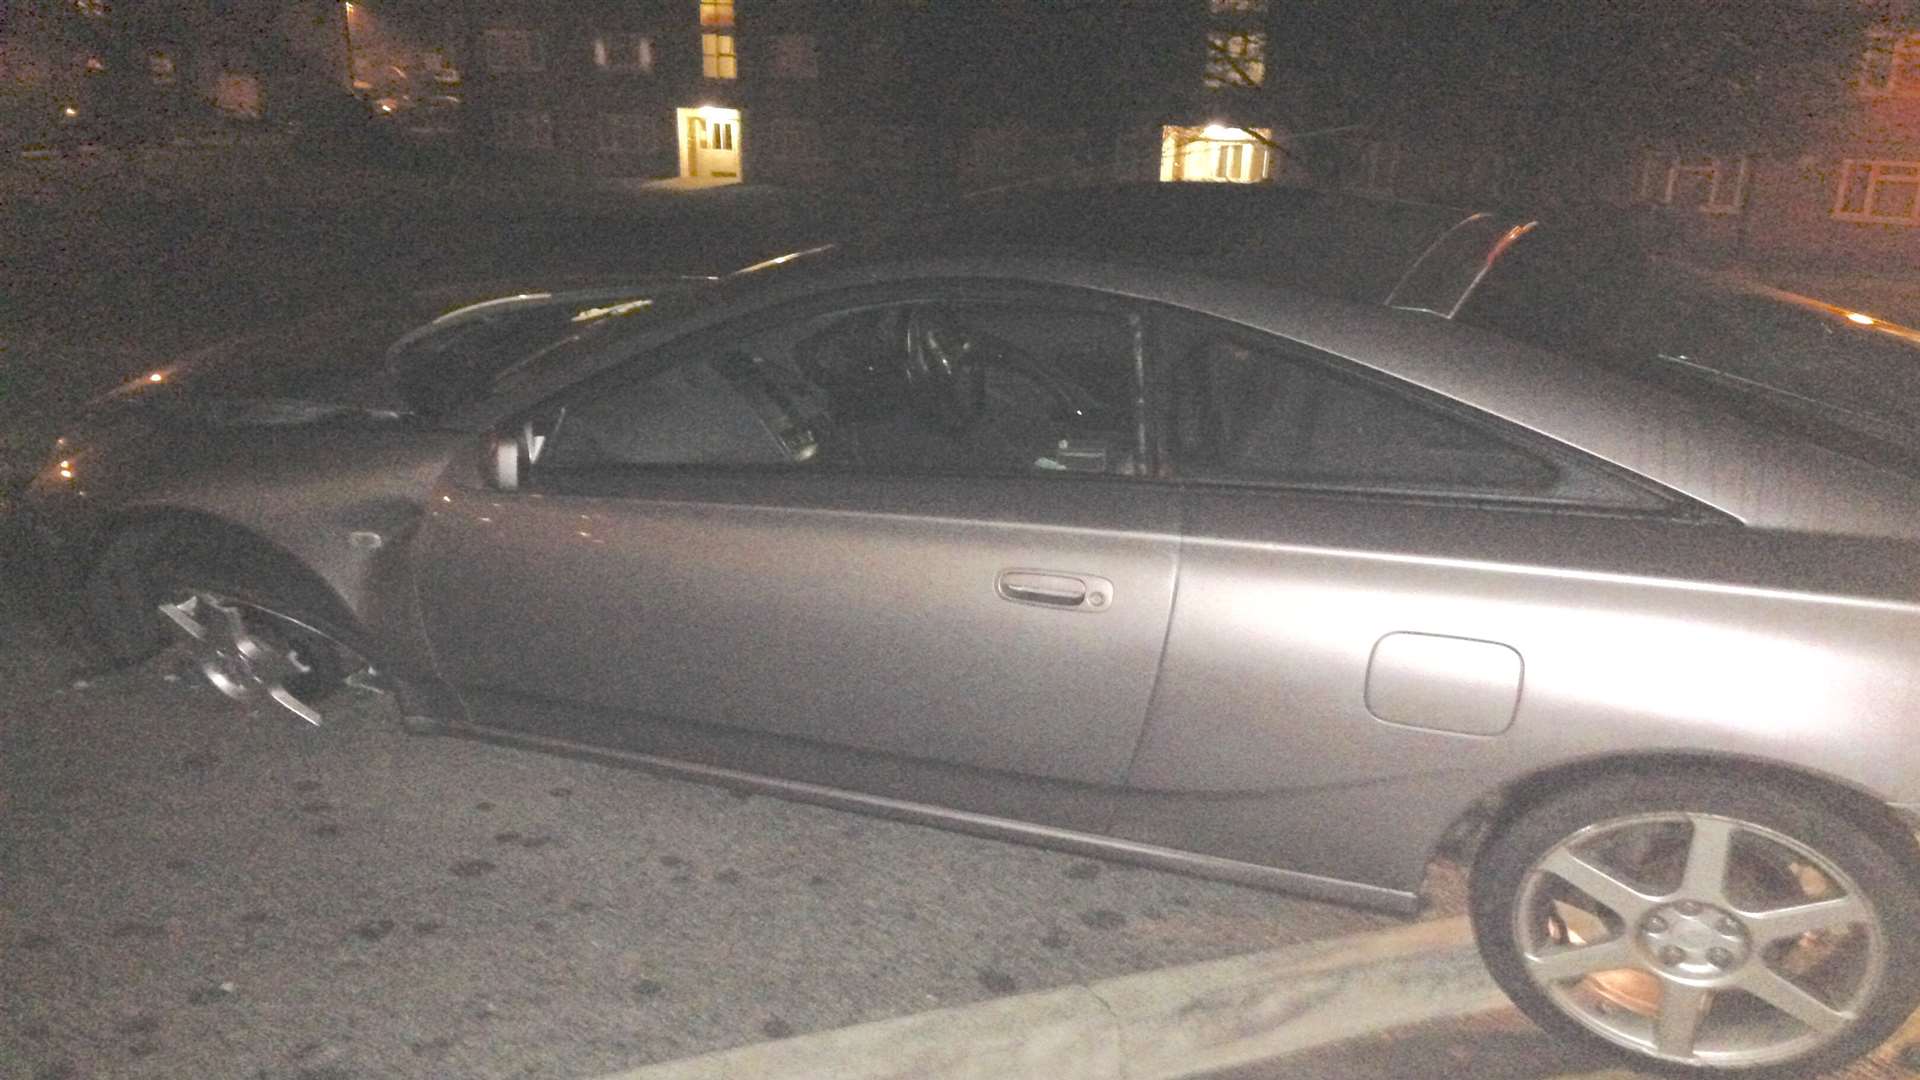 The Toyota Celica was parked in Eastcourt Lane when it was hit. Picture: Joe Clements